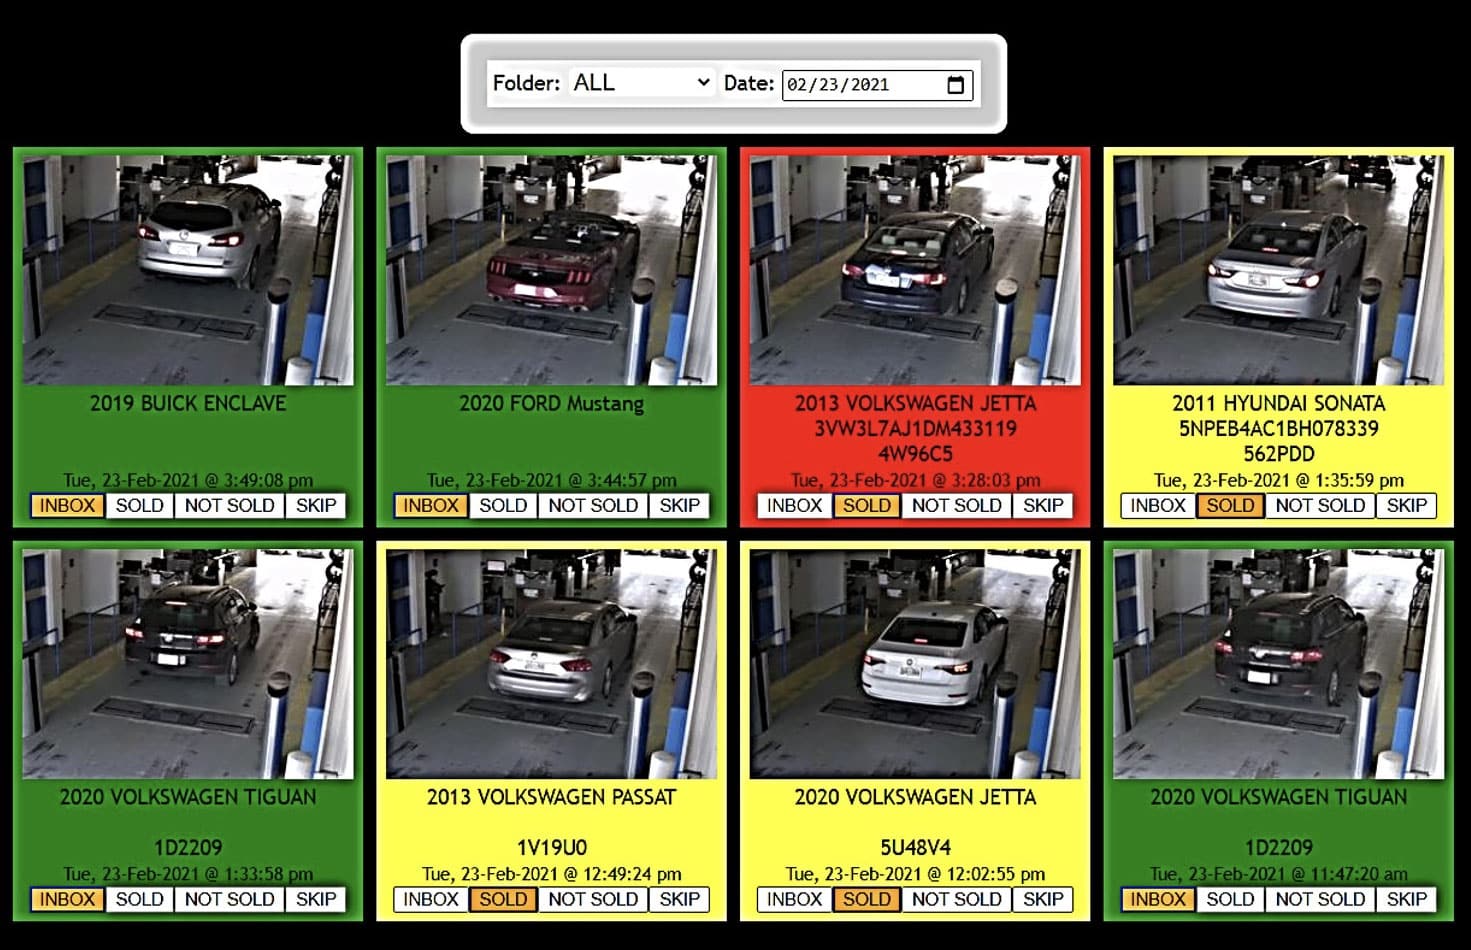 The desktop interface of the Coats Alignment Scanner system has color coded red, green, or yellow boxes that have an image of the car and the car’s make, model, and license plate in each box